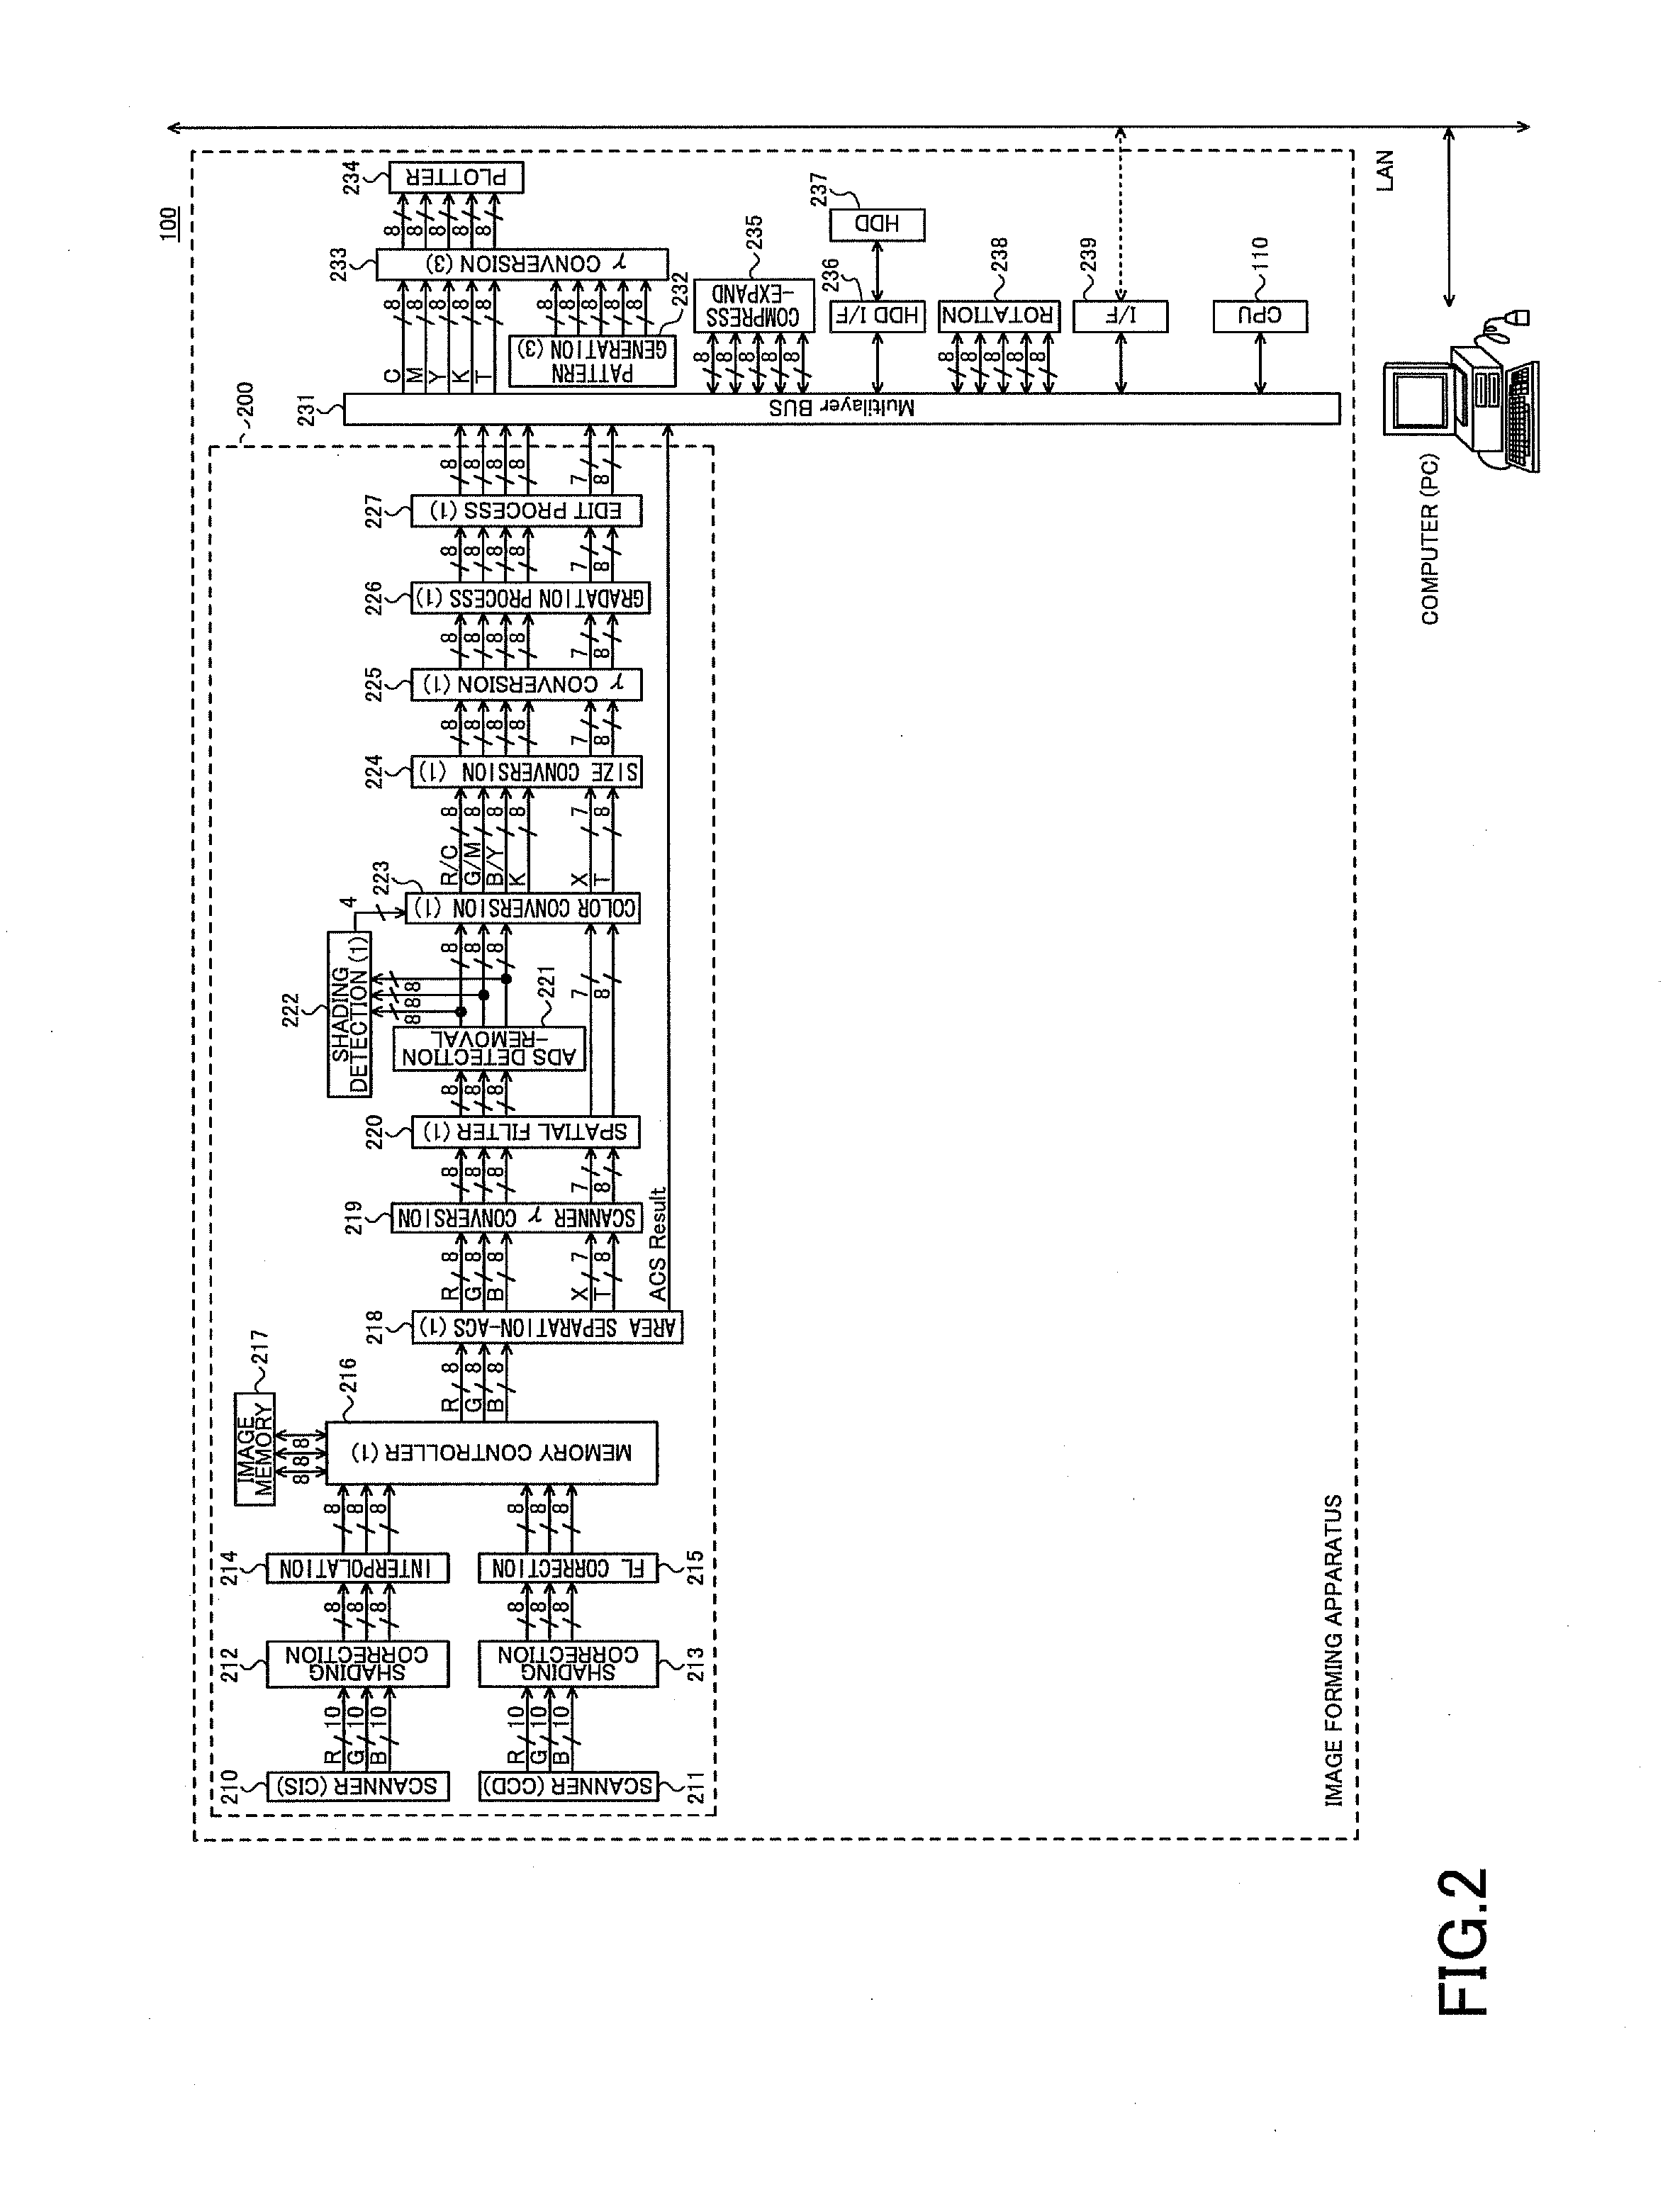 Image forming apparatus, method of forming image, and computer-readable recording medium